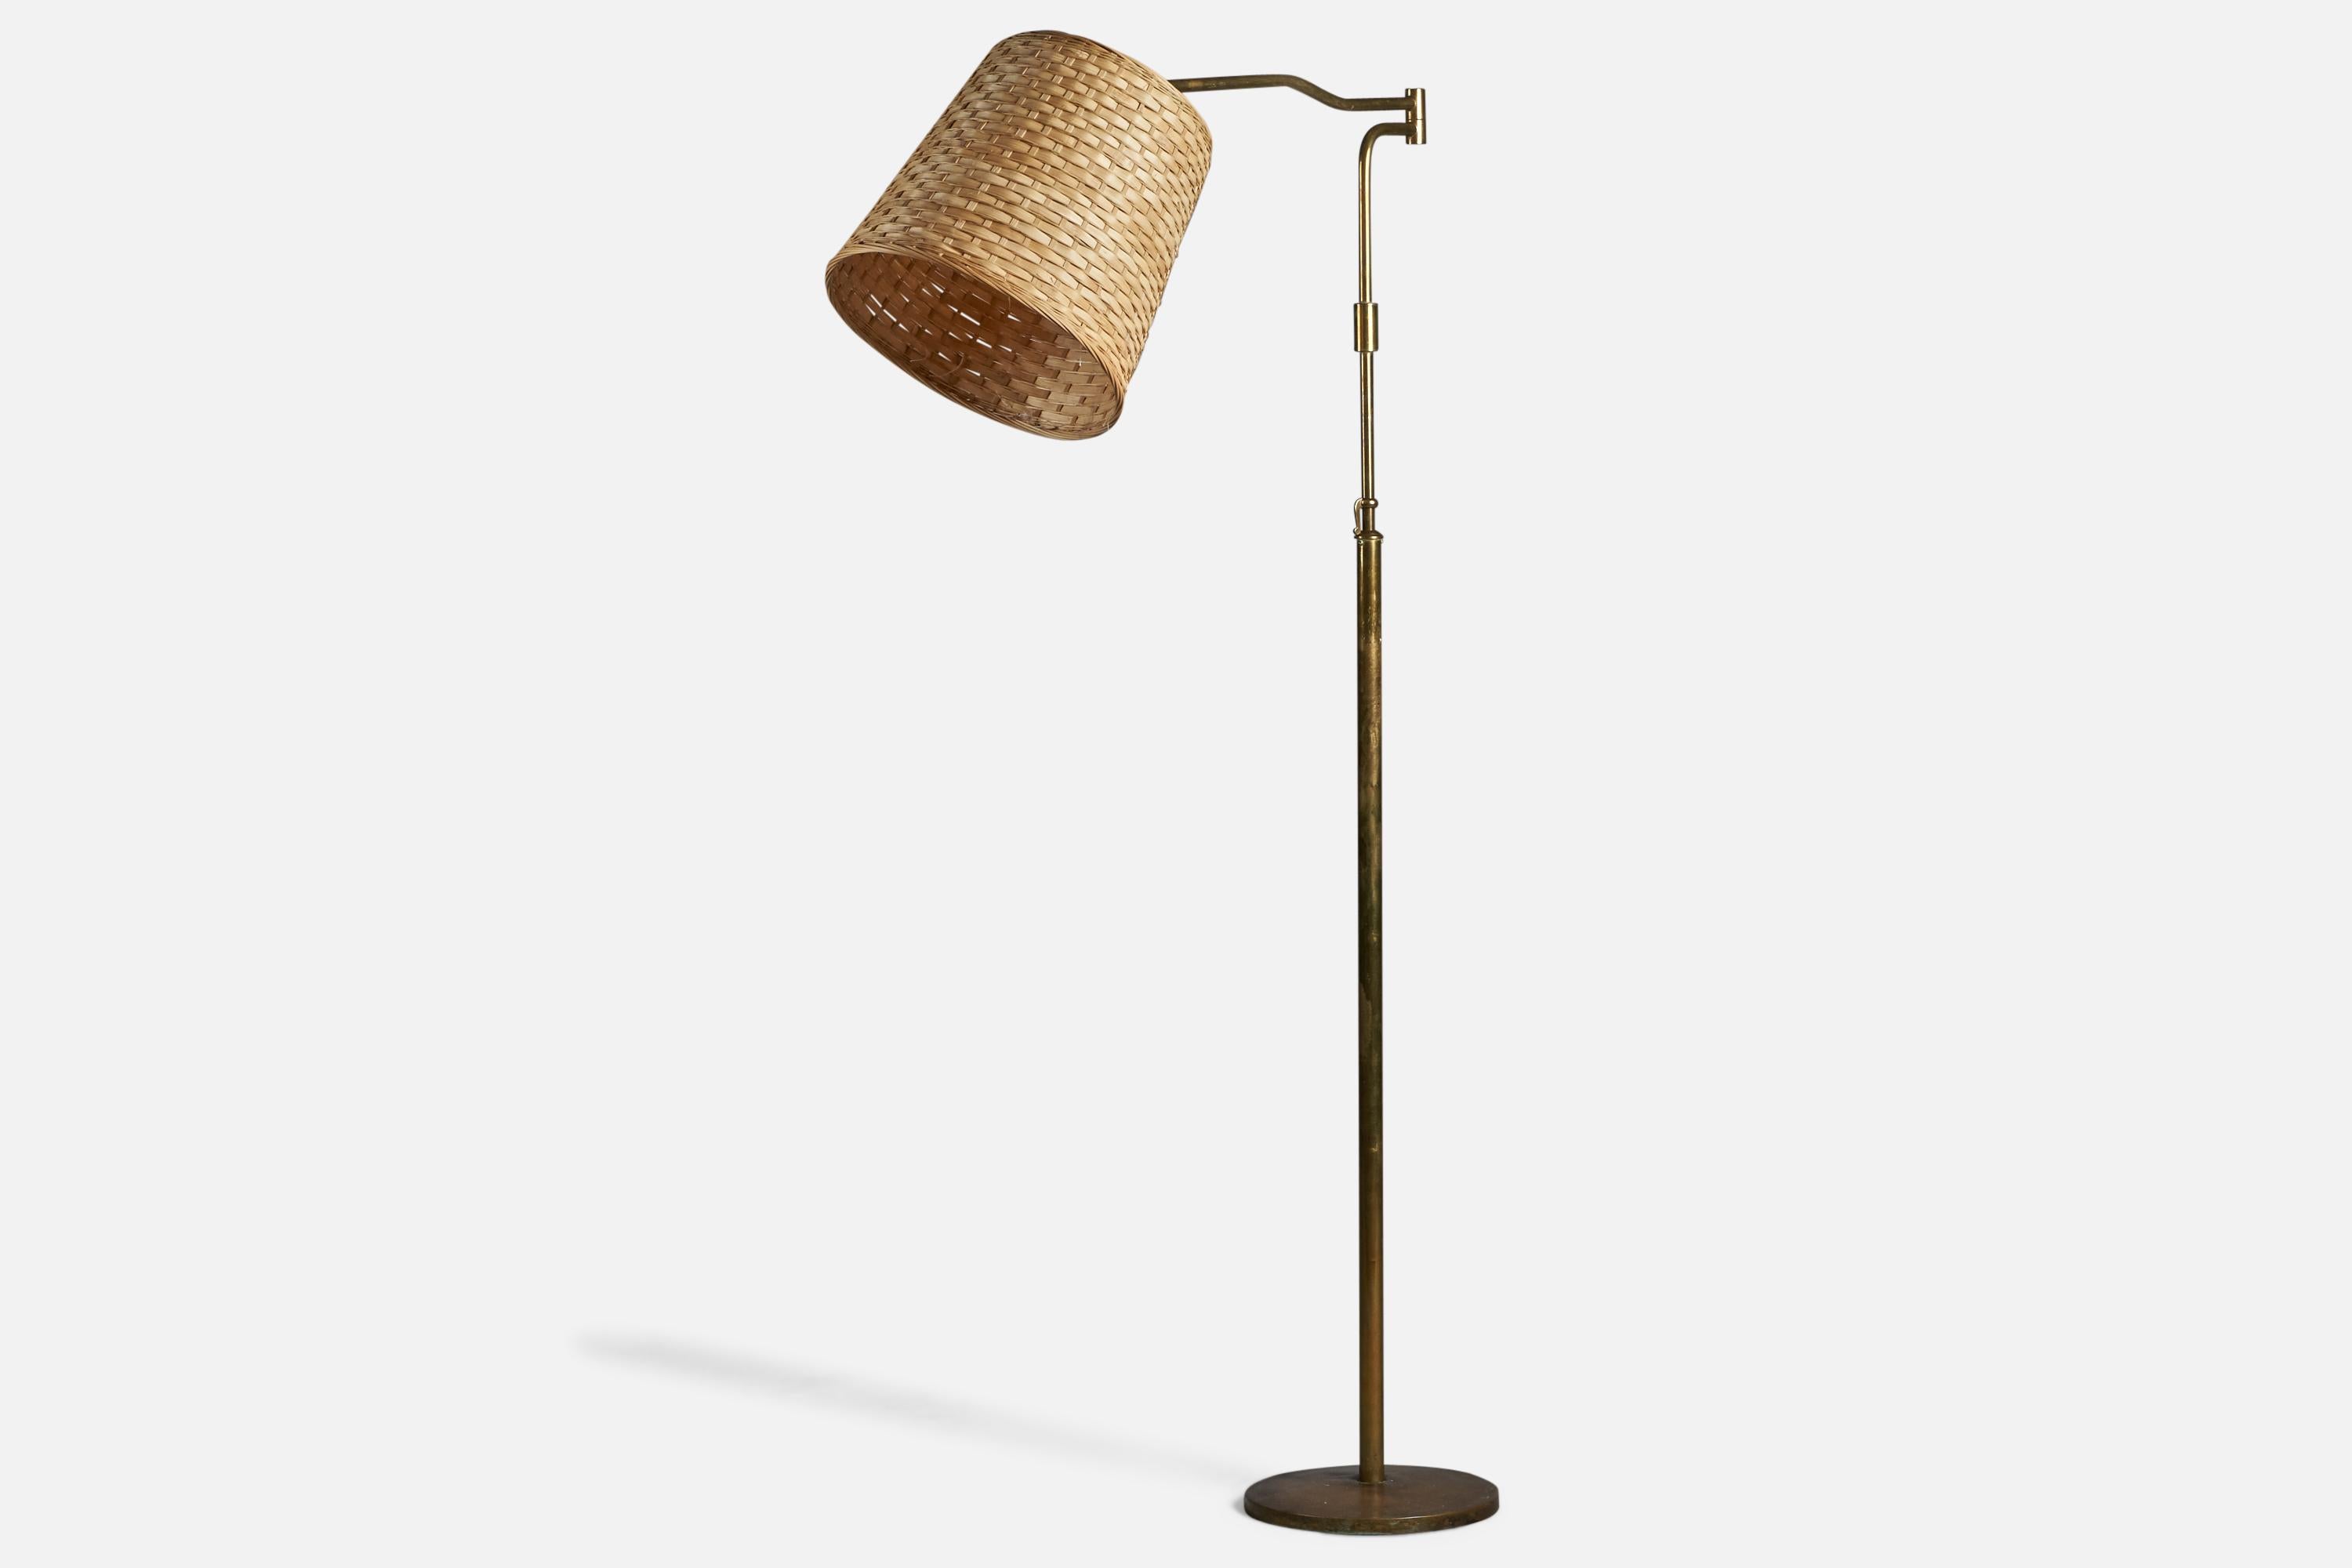 An adjustable brass and rattan floor lamp designed and produced in Italy, 1940s.

Overall Dimensions (inches): 68.5” H x 14.5” W x 40” D
Bulb Specifications: E-26 Bulb
Number of Sockets: 1
All lighting will be converted for US usage. We are unable